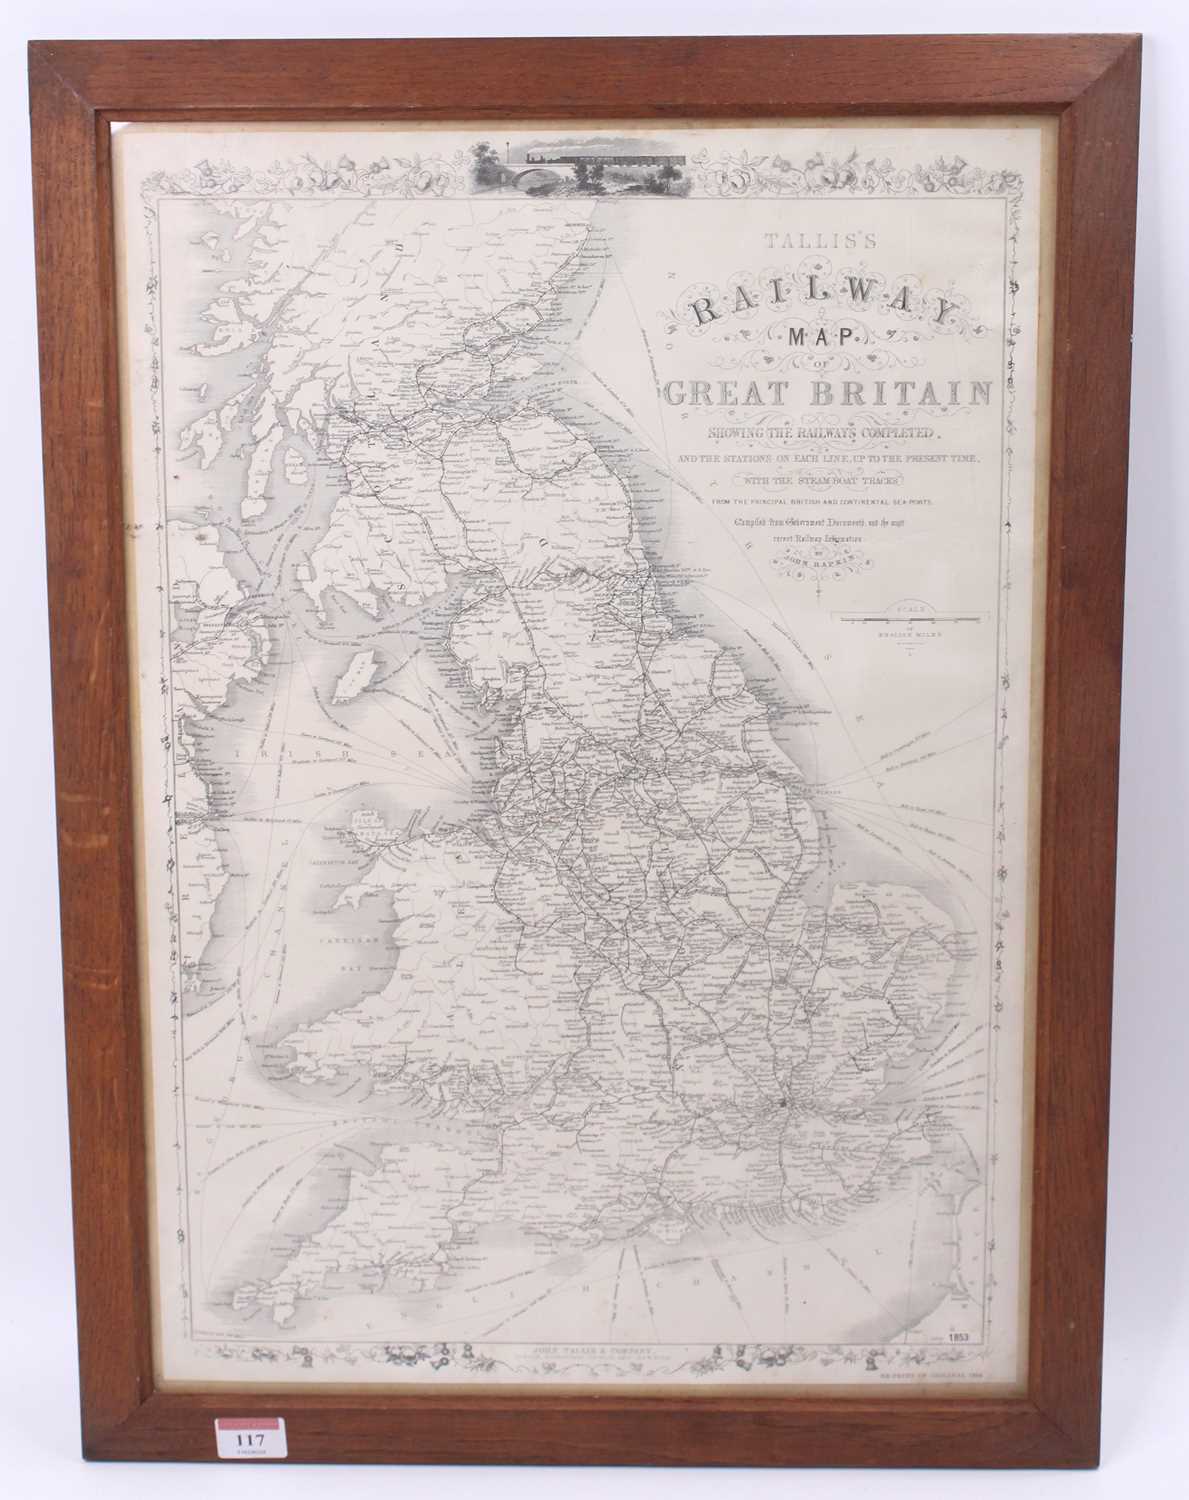 A John Tallis & Co reprinted railway map of Great Britain dating to approx 1968, black on white